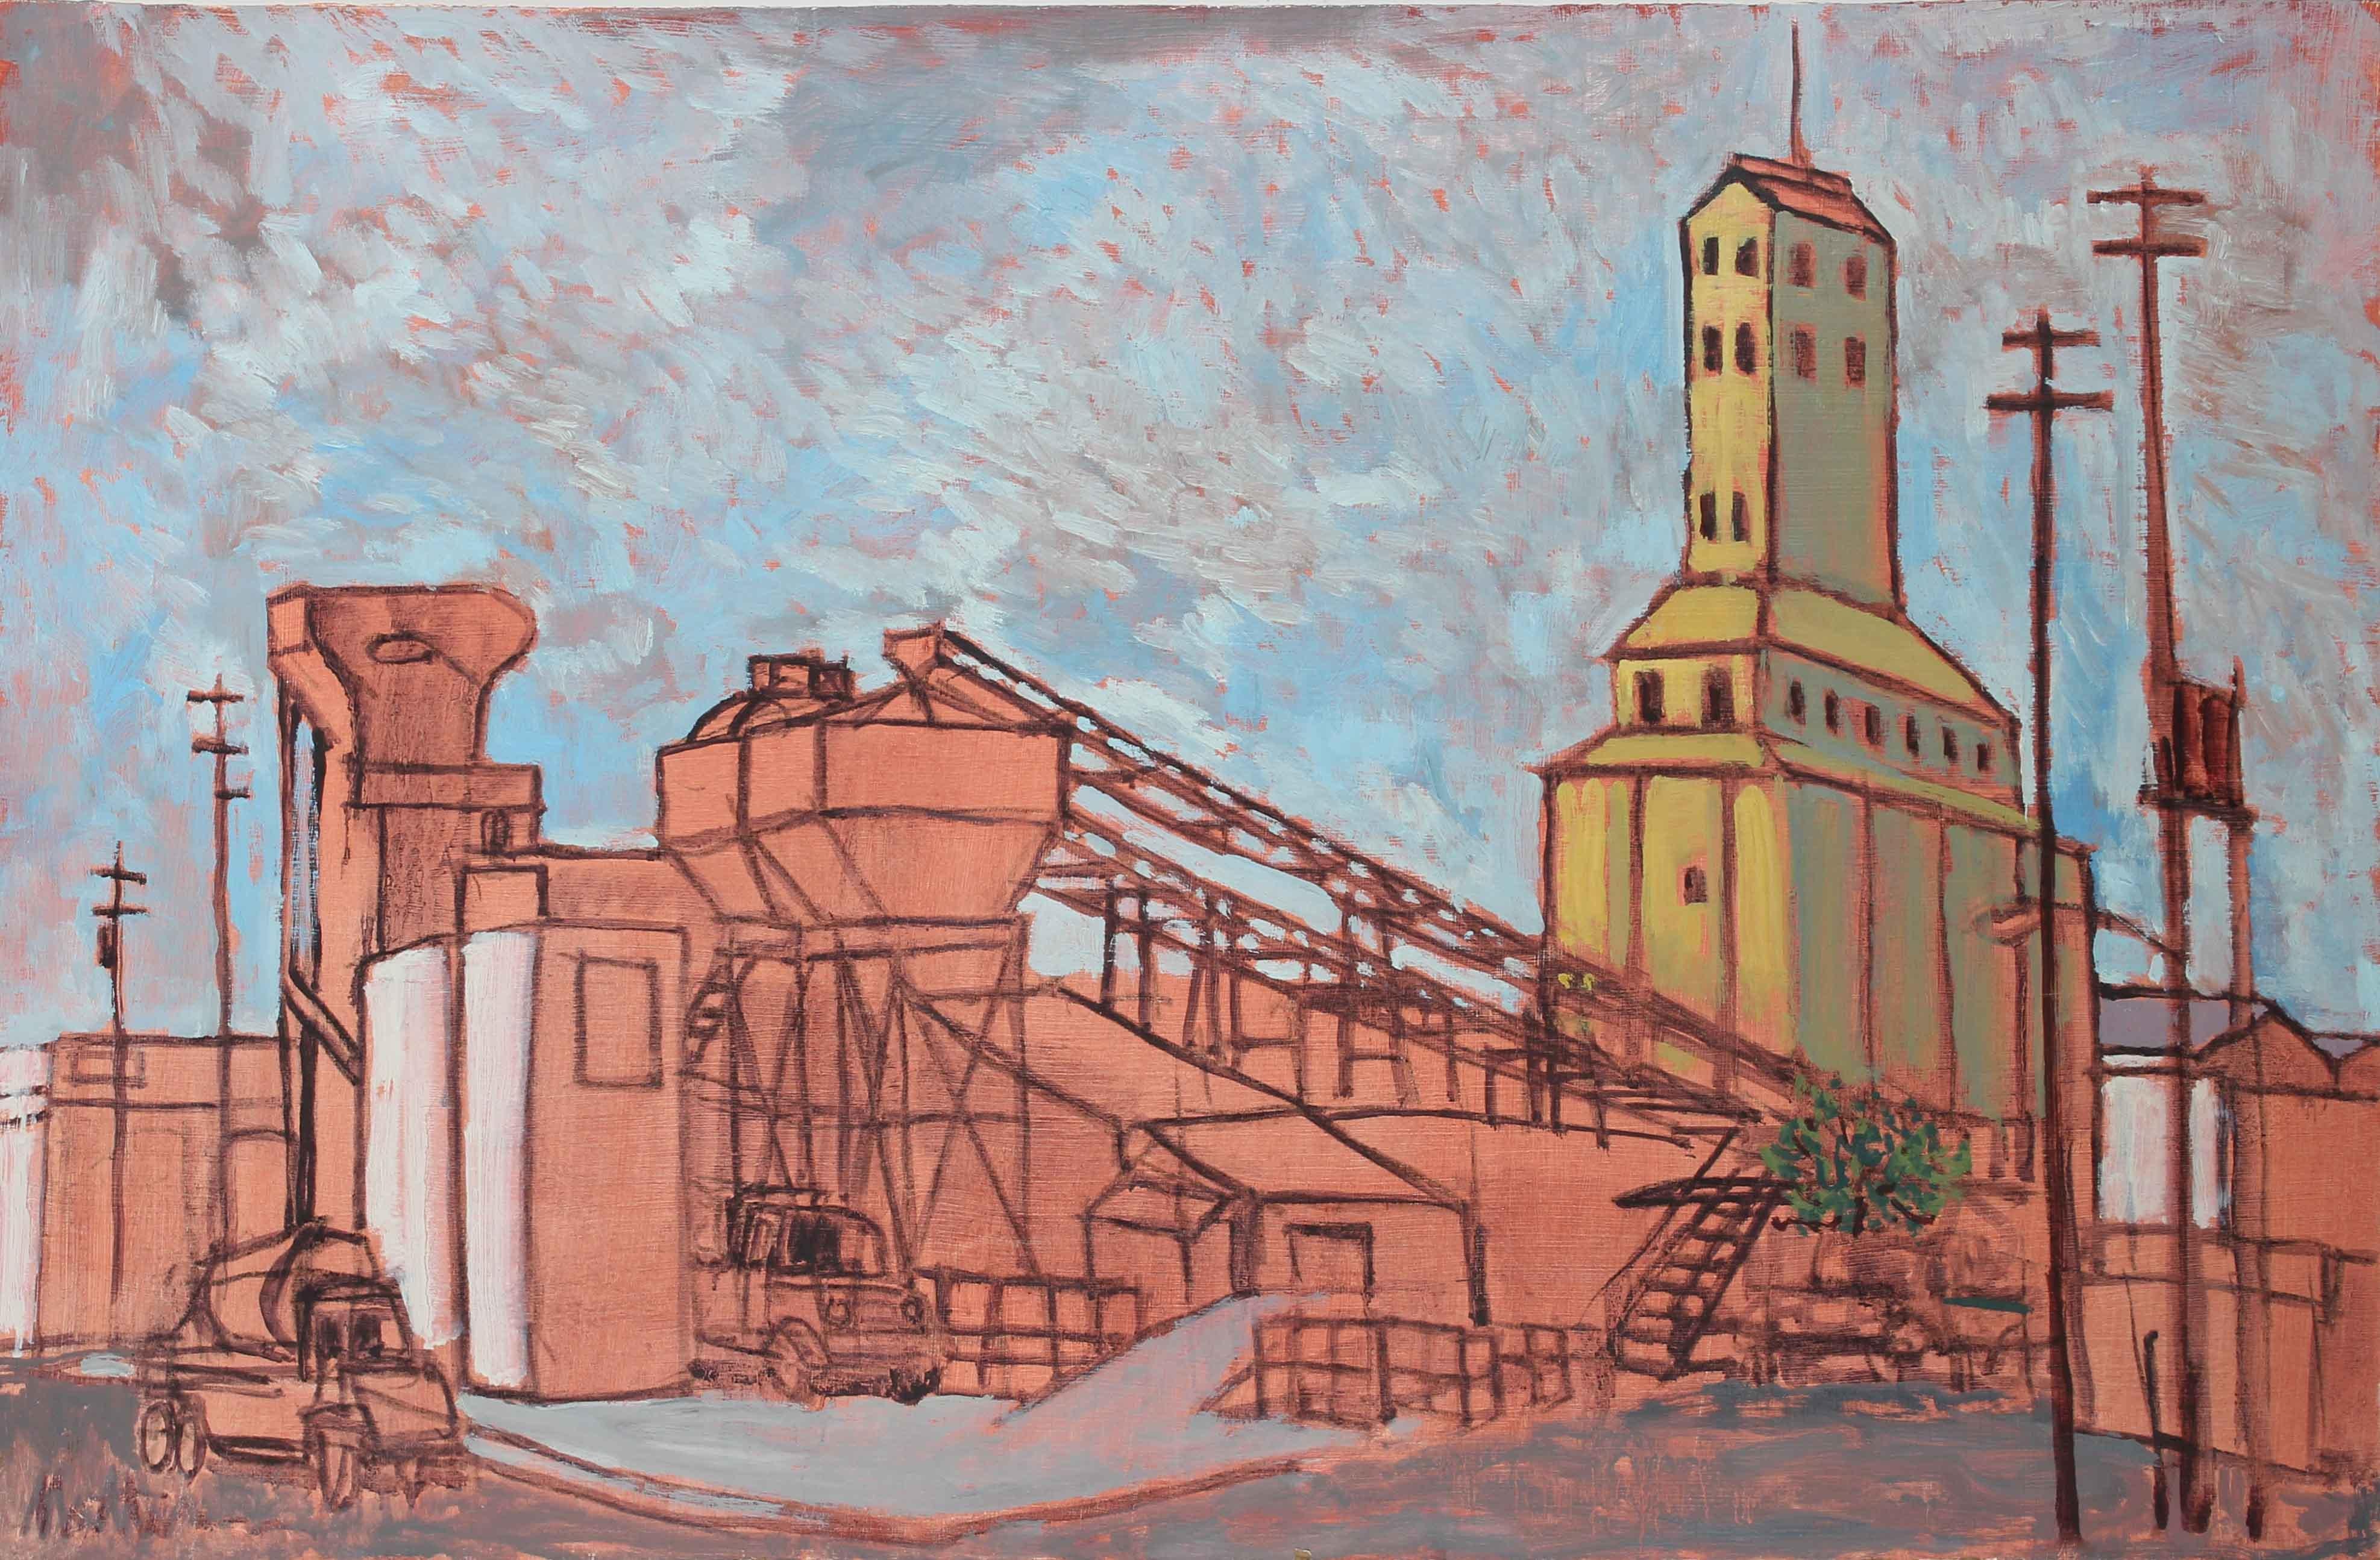 Industrial Landscape, Oil on Masonite Painting, Late 20th Century